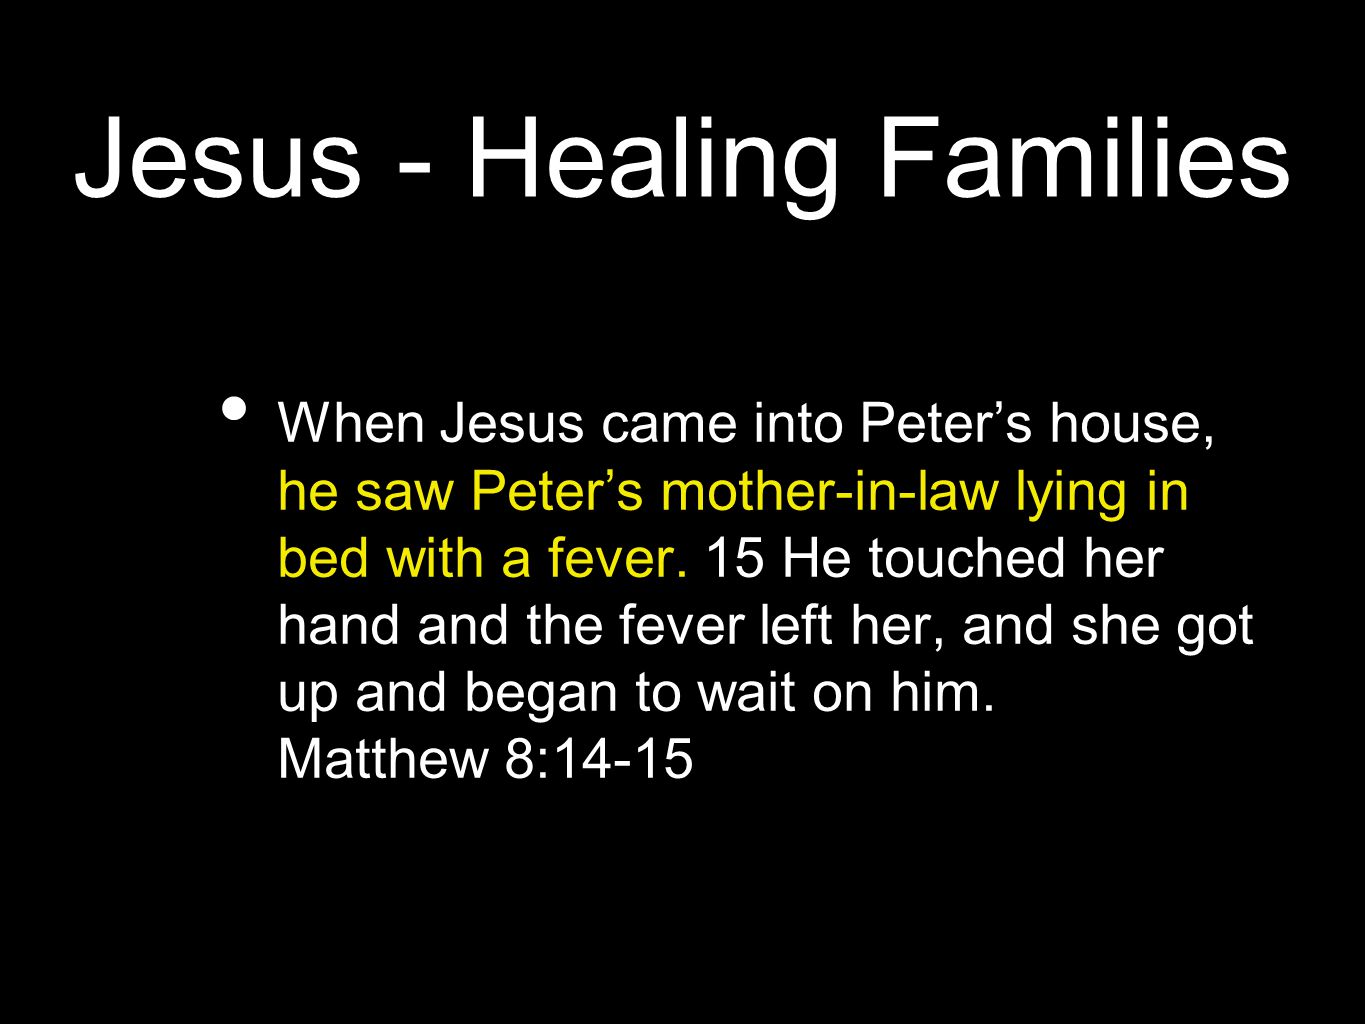 Jesus - Healing Families When Jesus came into Peter’s house, he saw Peter’s mother-in-law lying in bed with a fever.